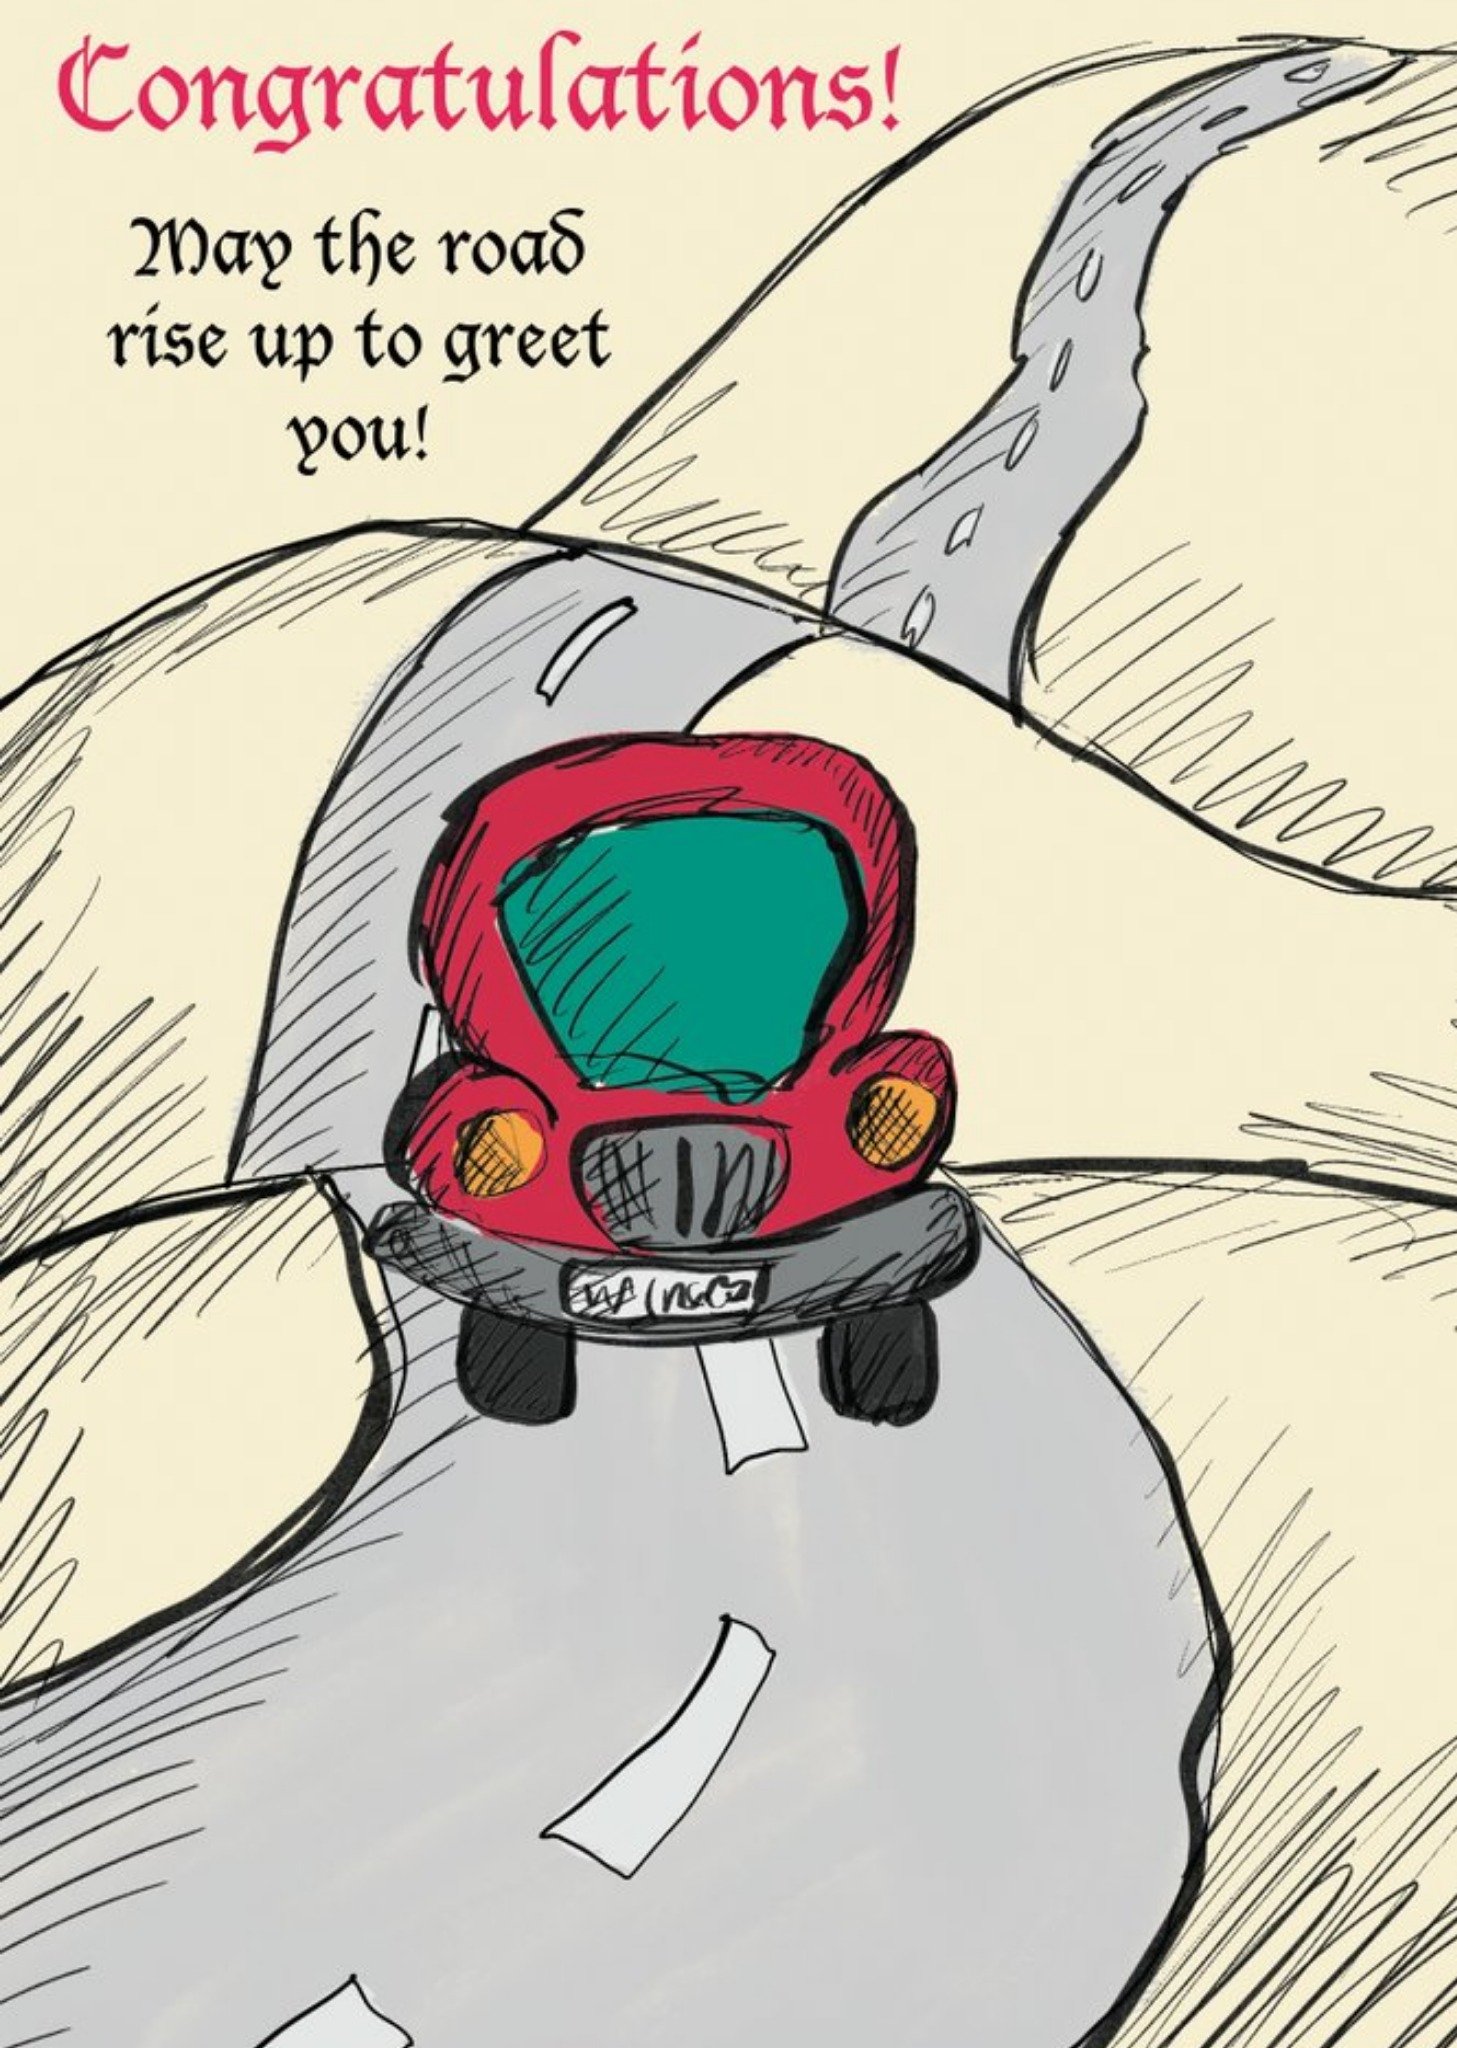 Moonpig Poet And Painter Illustrated Car On Rising Road Congratulations Card Ecard